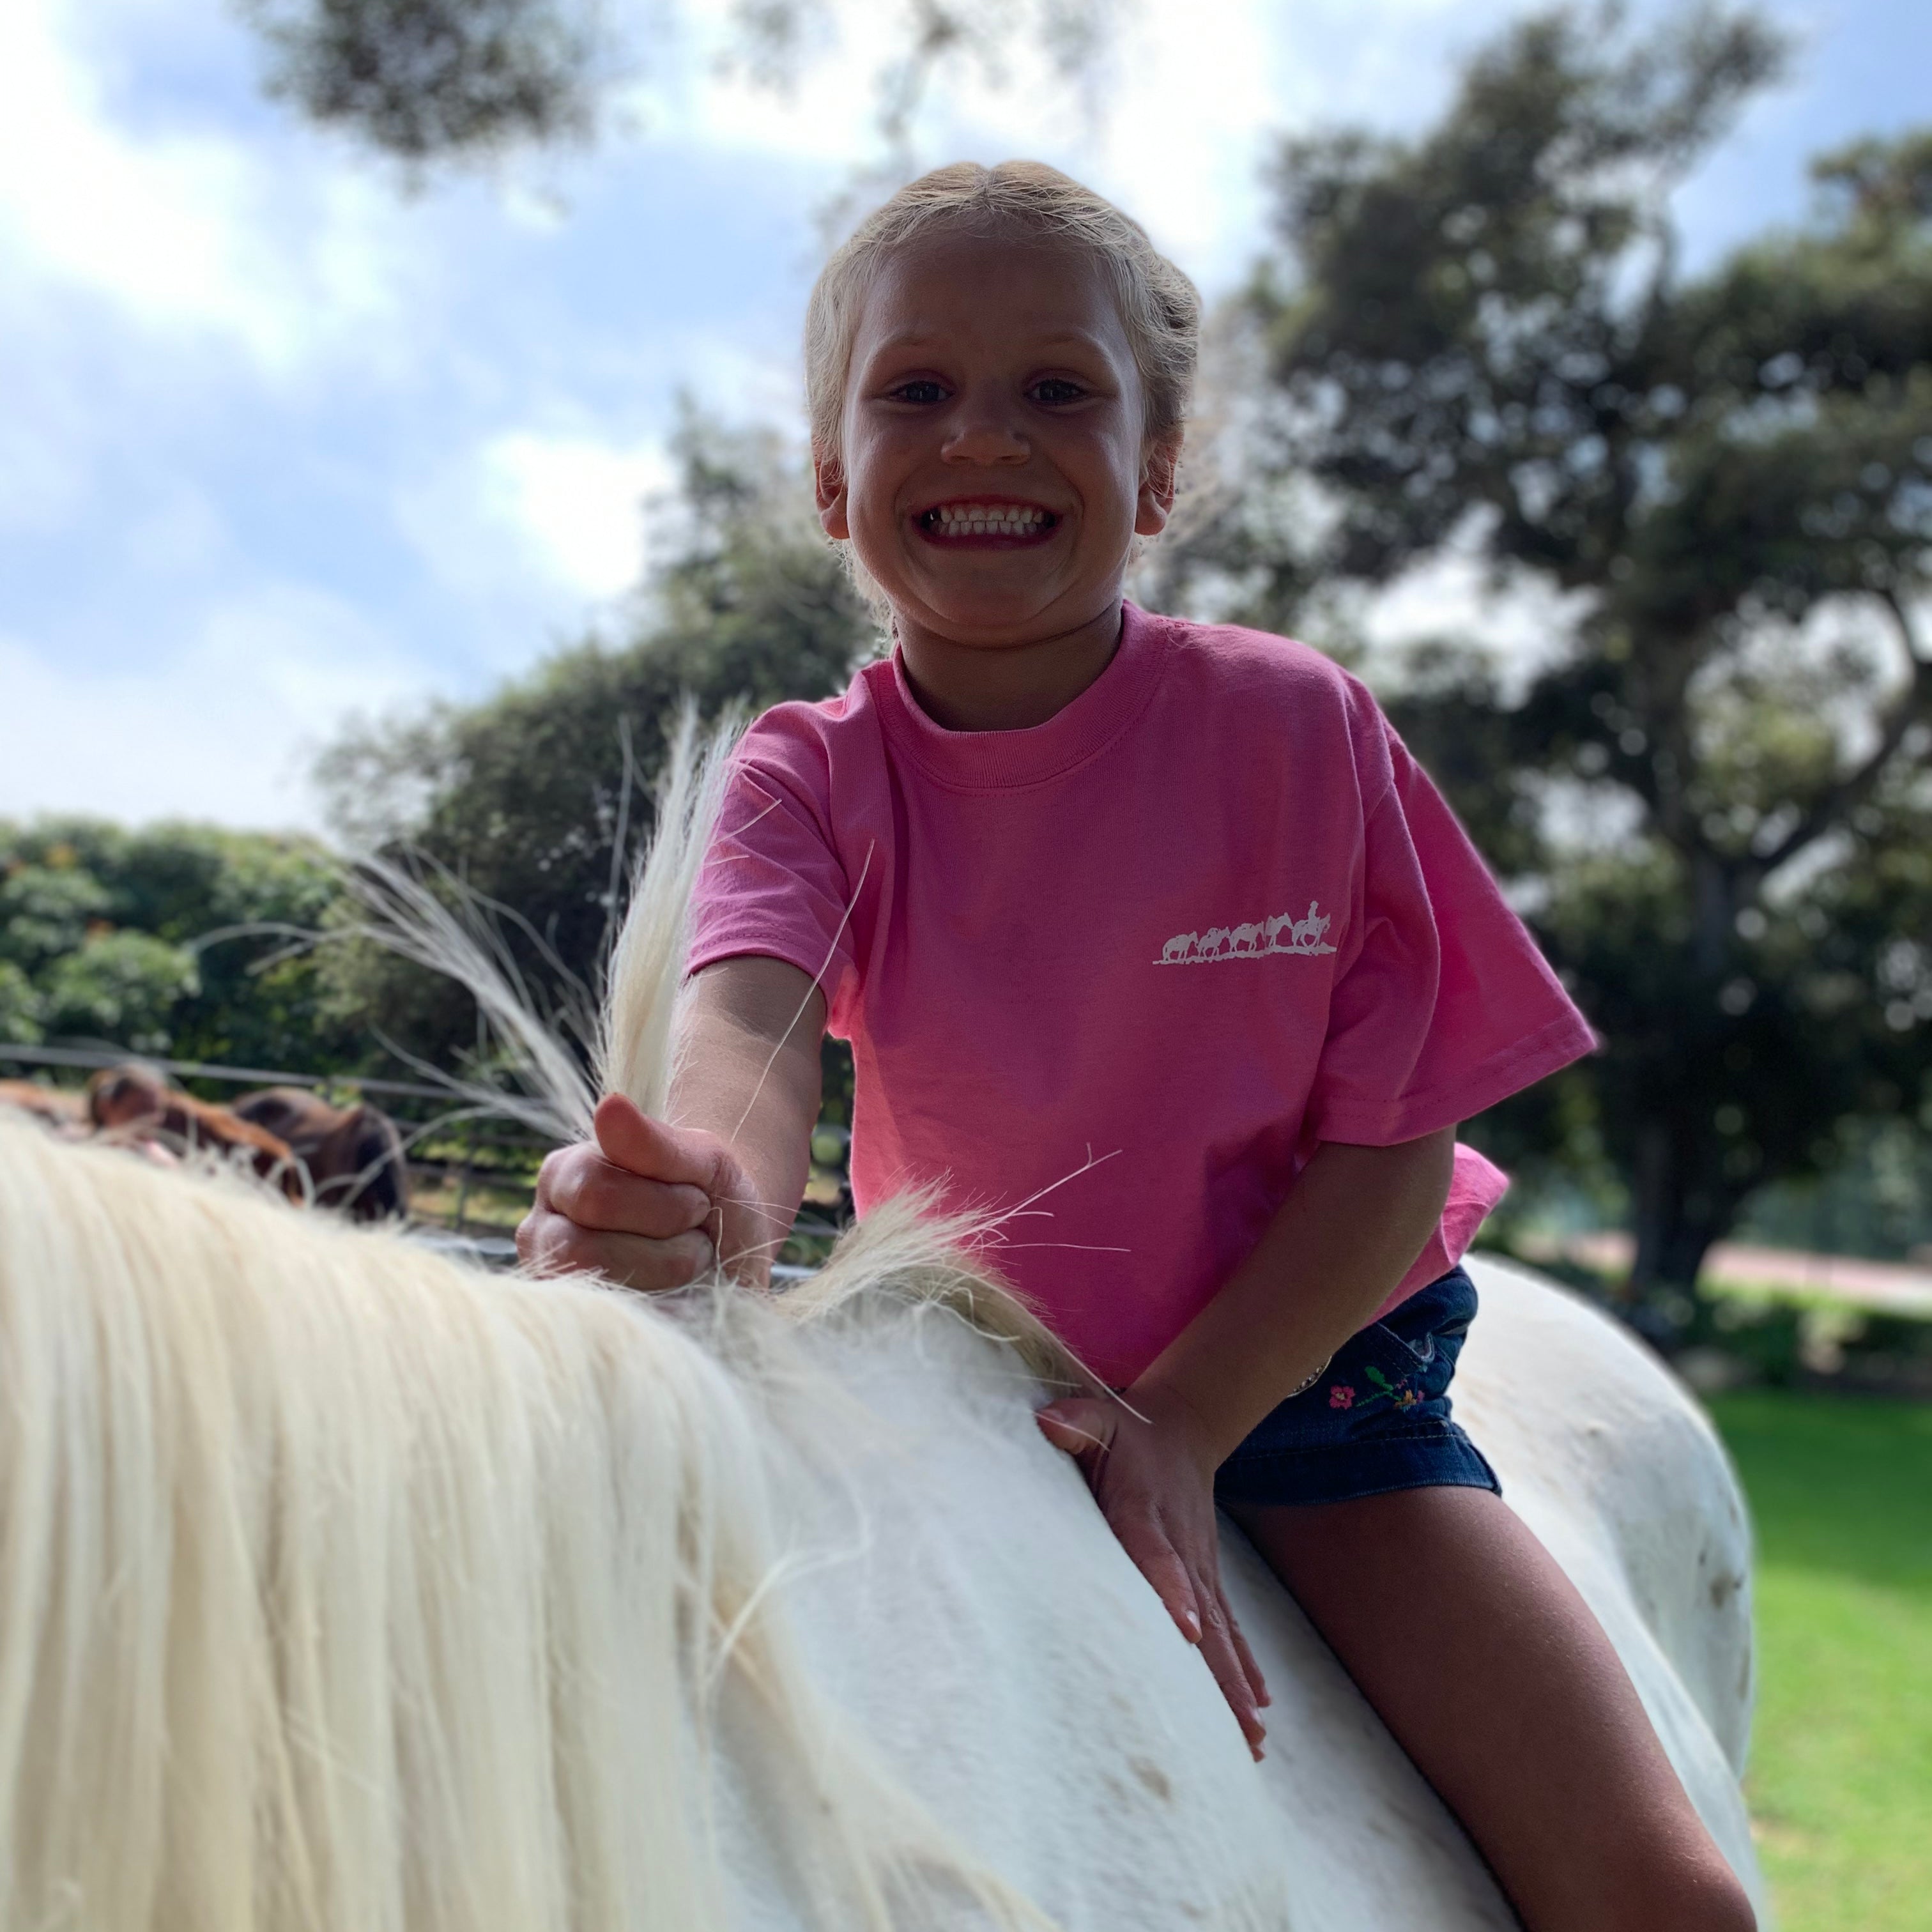 Front view of little girl riding a horse outside wearing the comfortable pink cotton Kids Short Sleeve Tee